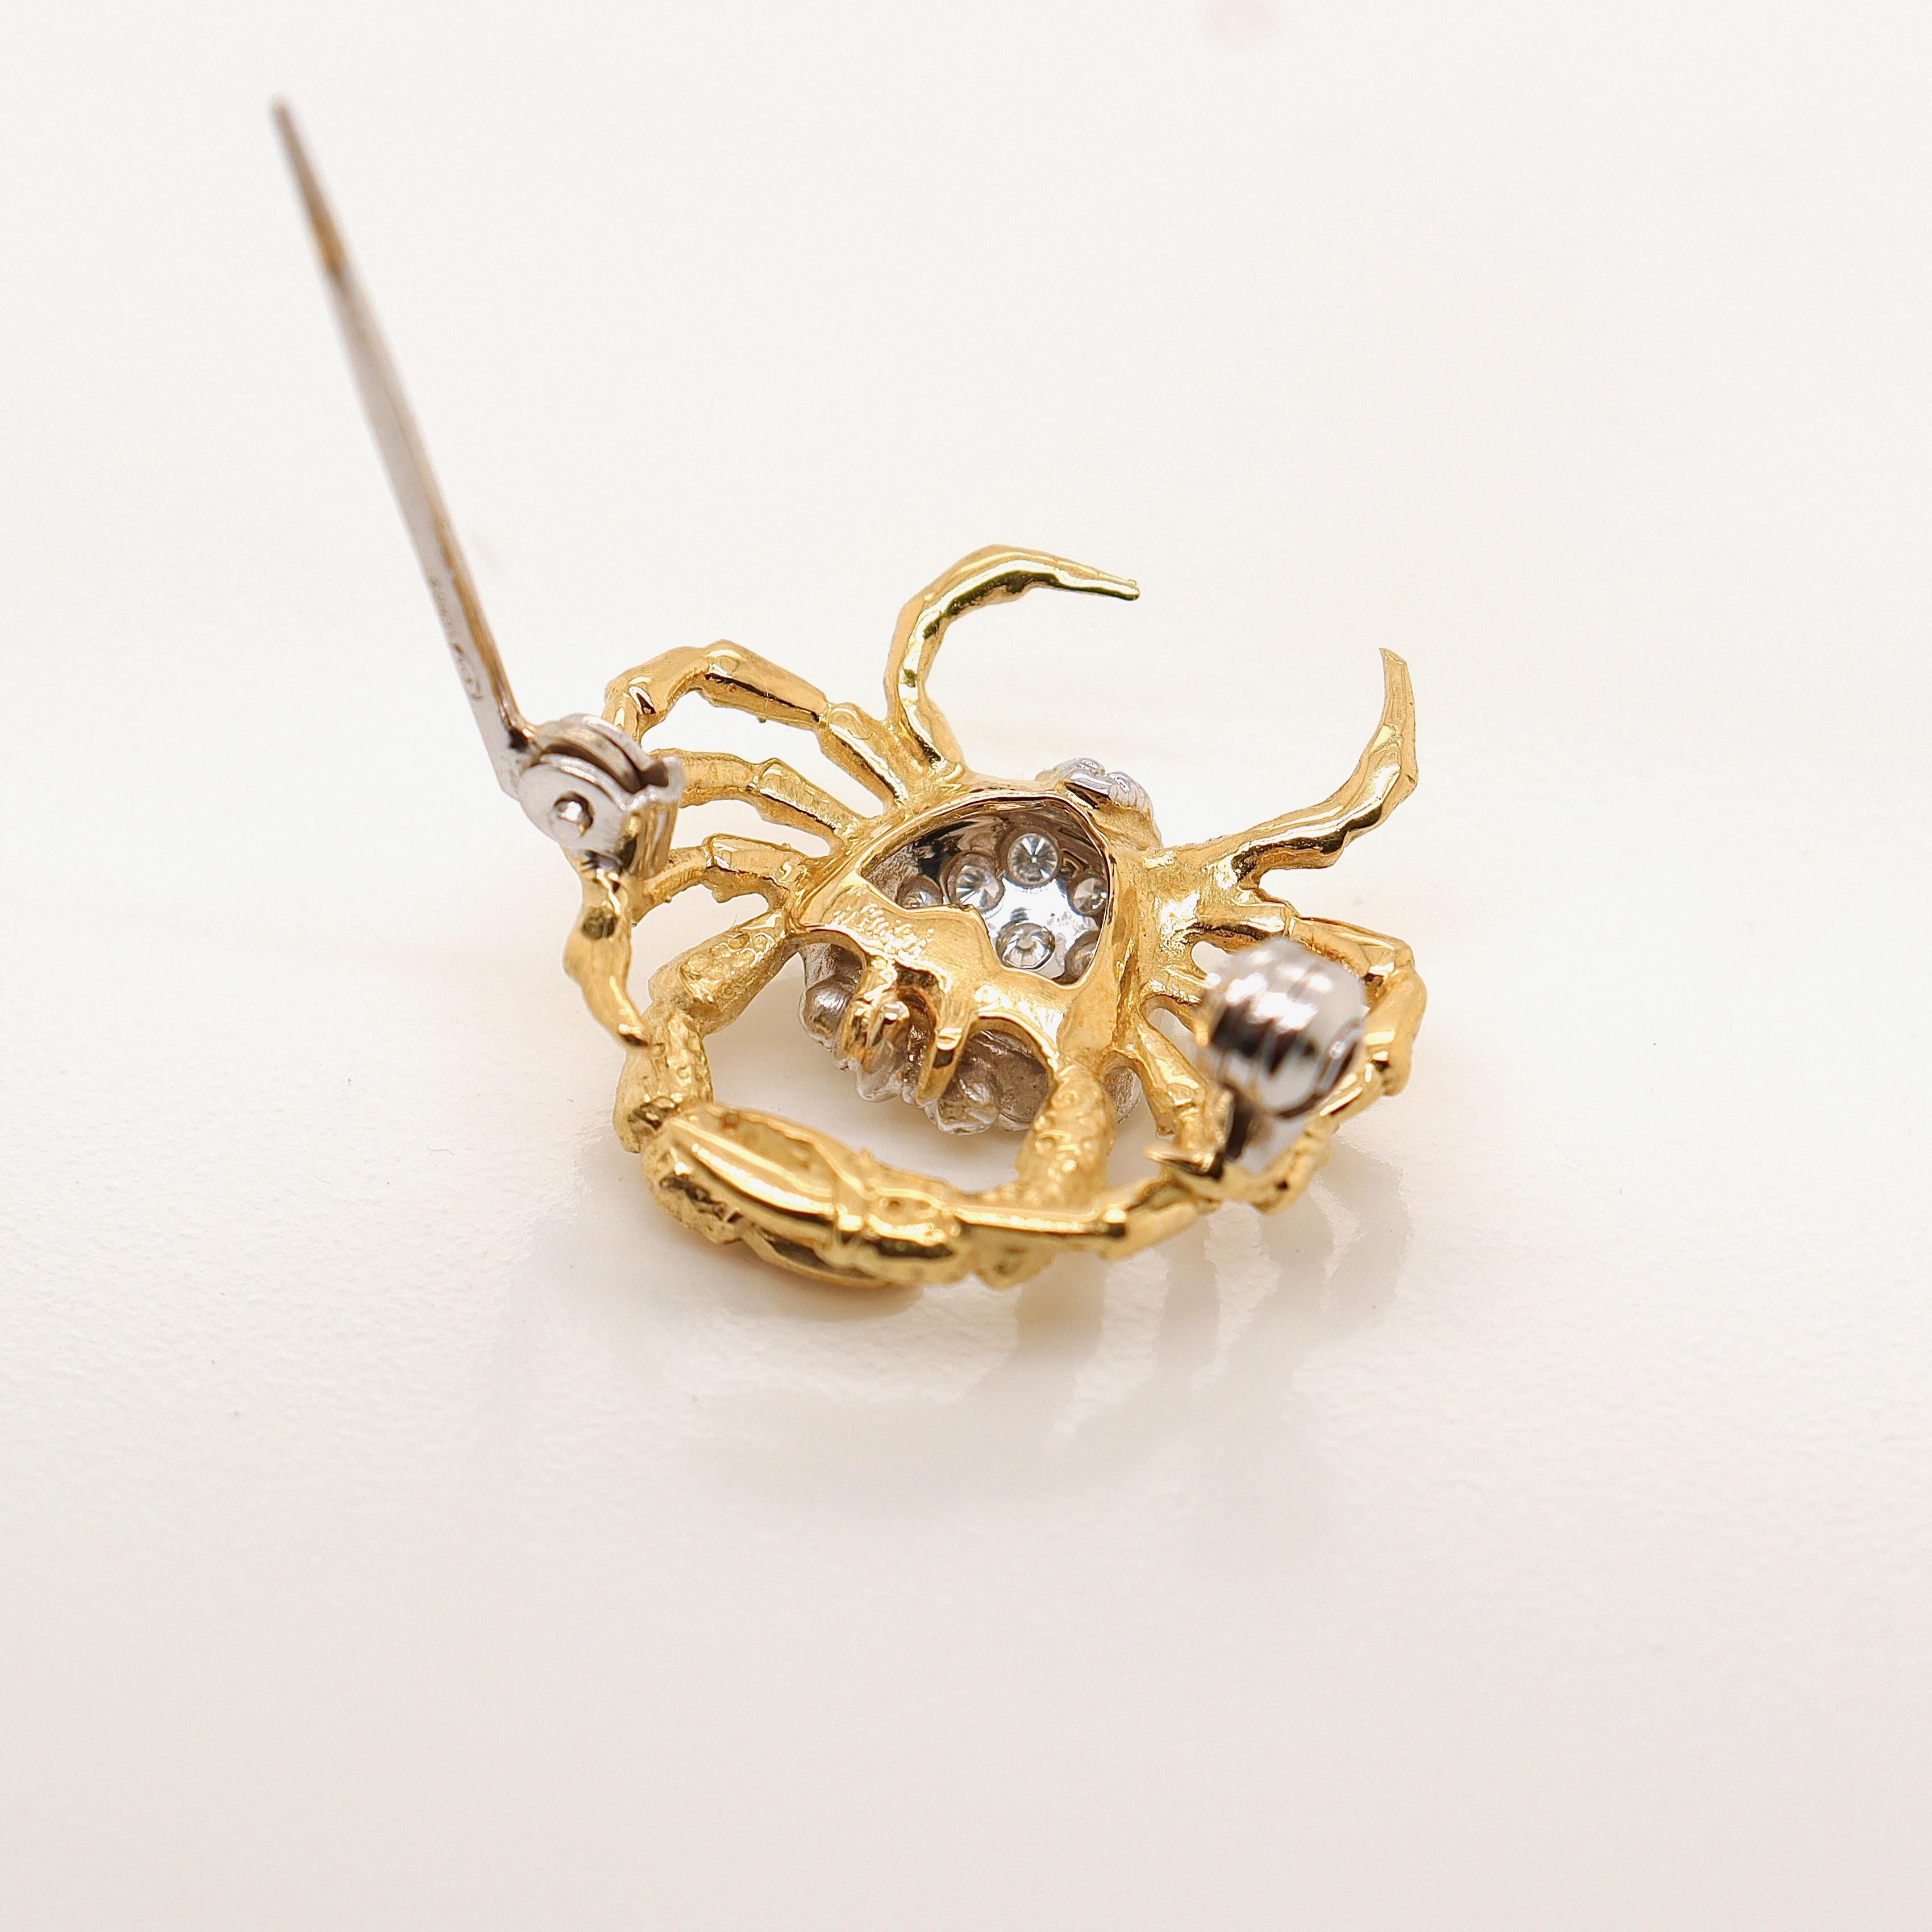 Signed Damiani 18k Gold & Diamond Crab Shaped Brooch or Pin  For Sale 9